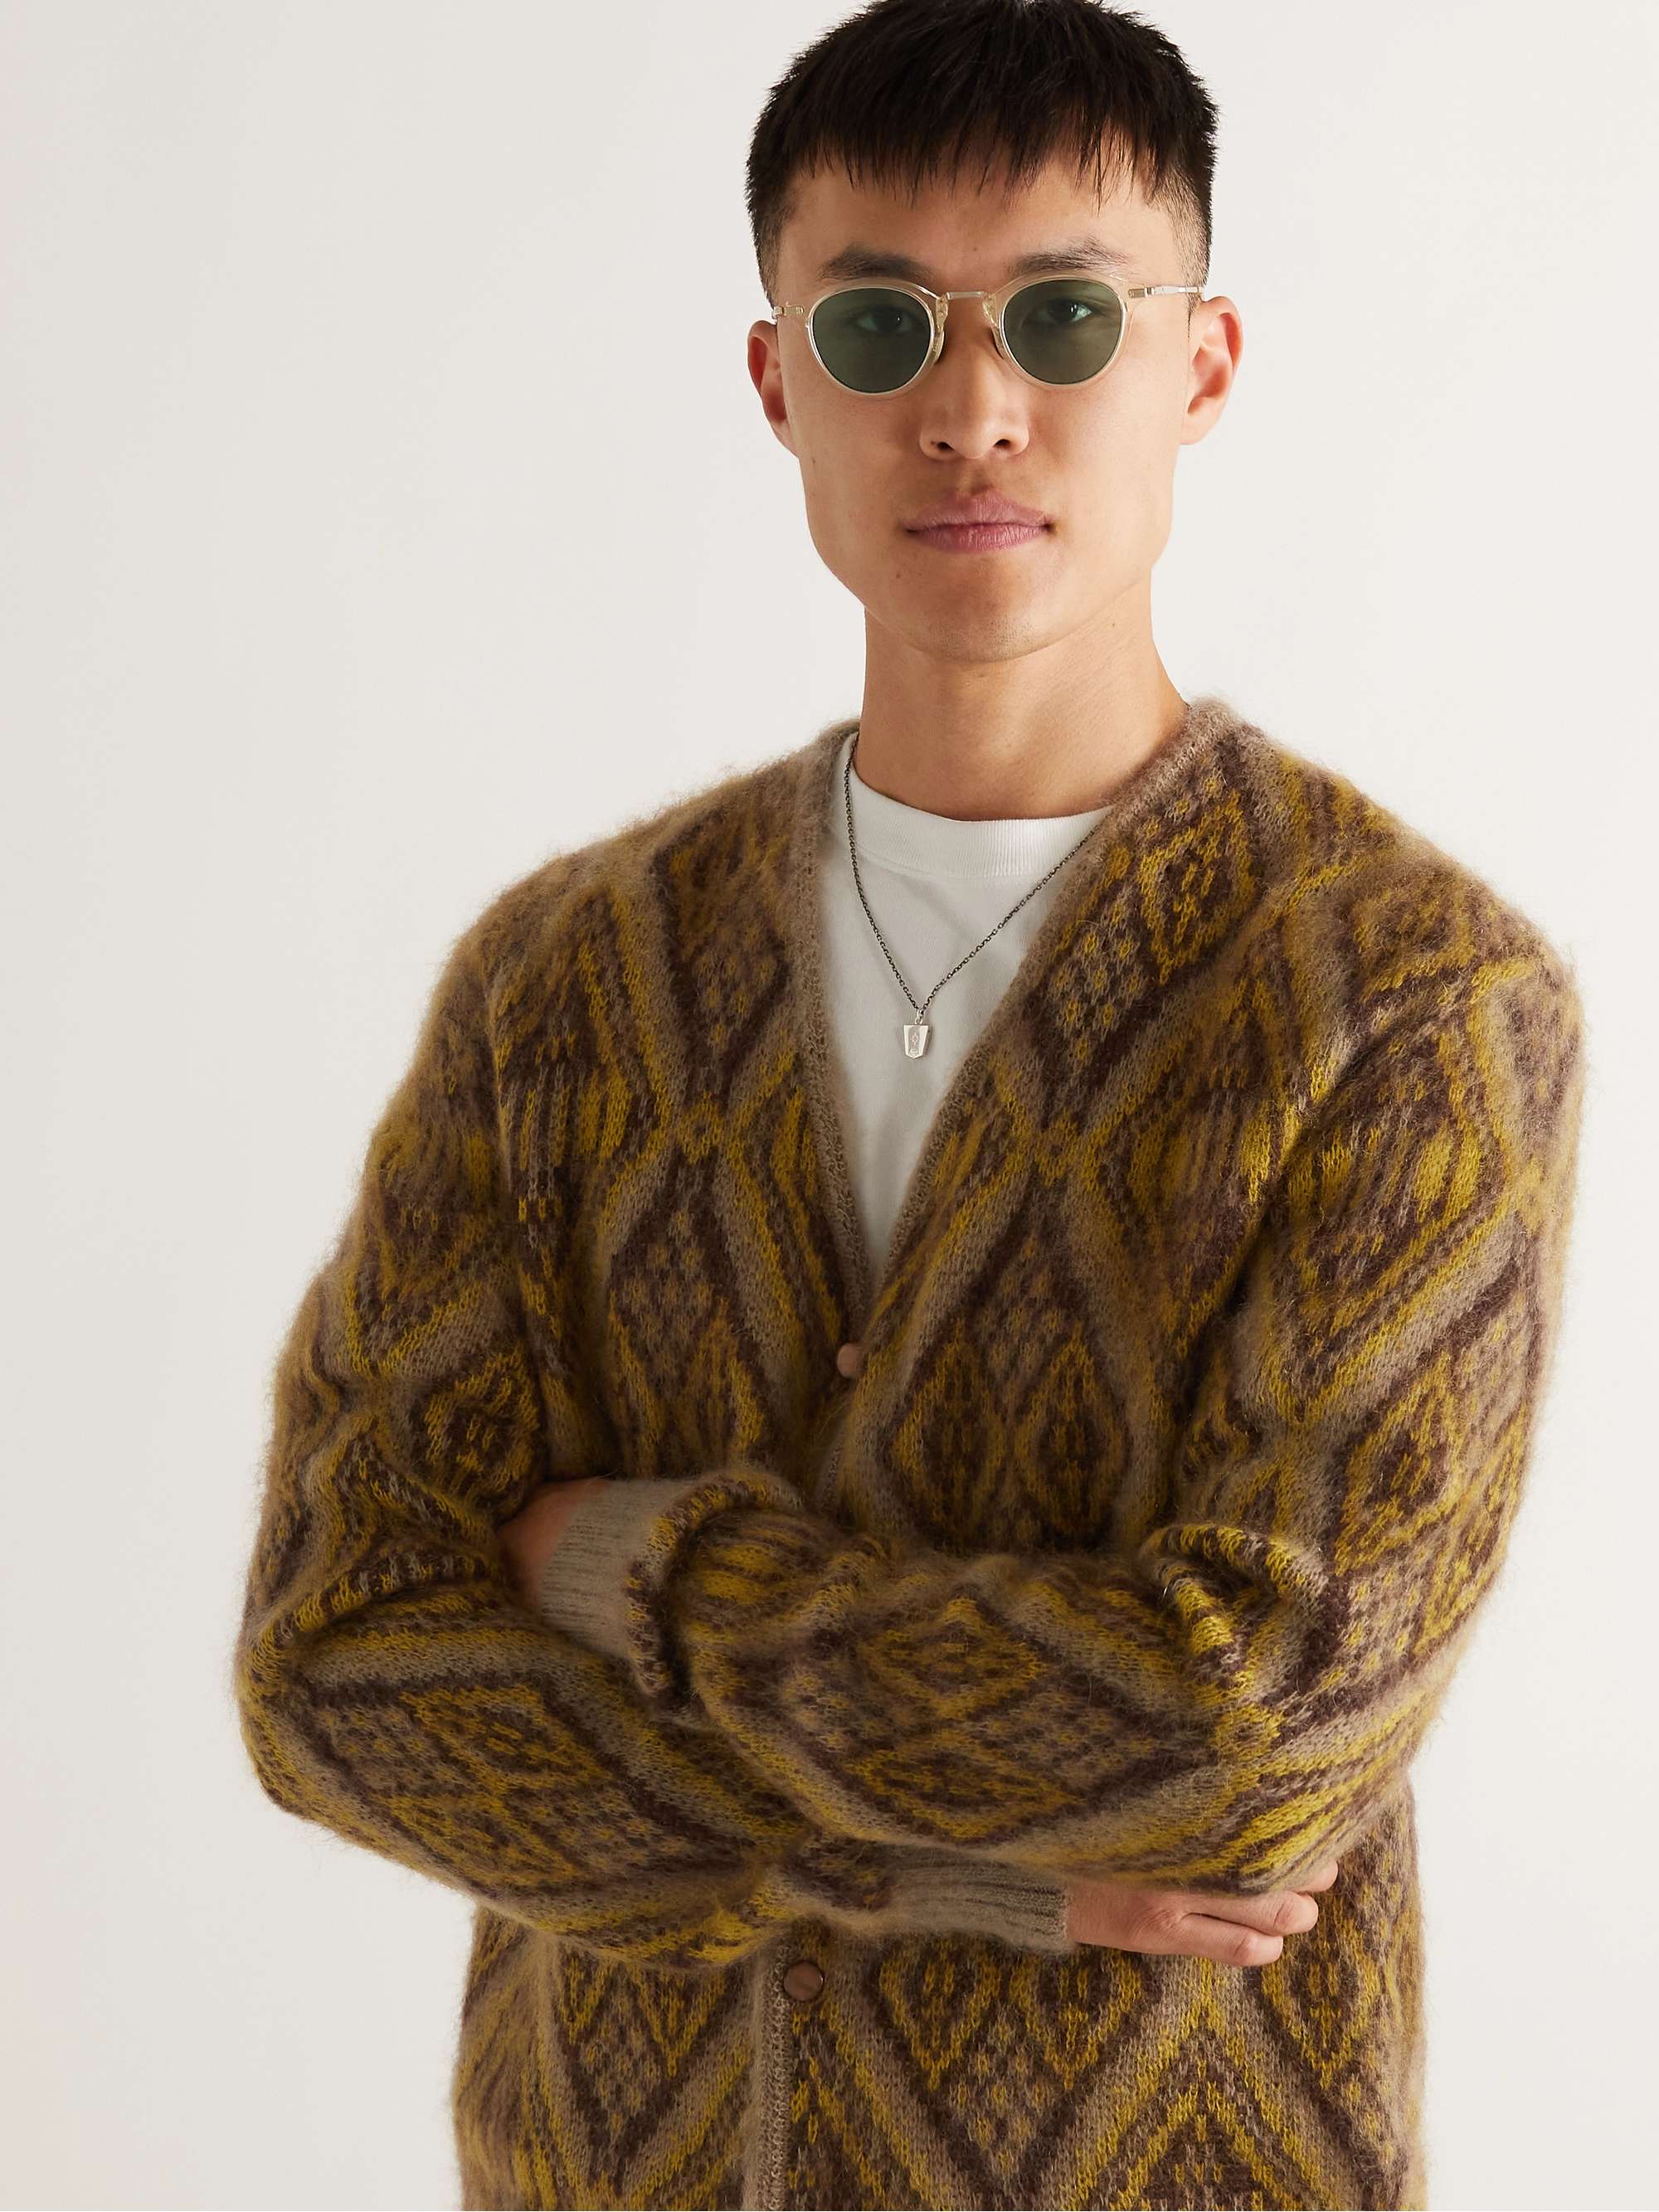 MR LEIGHT Stanley S Round-Frame Acetate and Gold-Tone Sunglasses